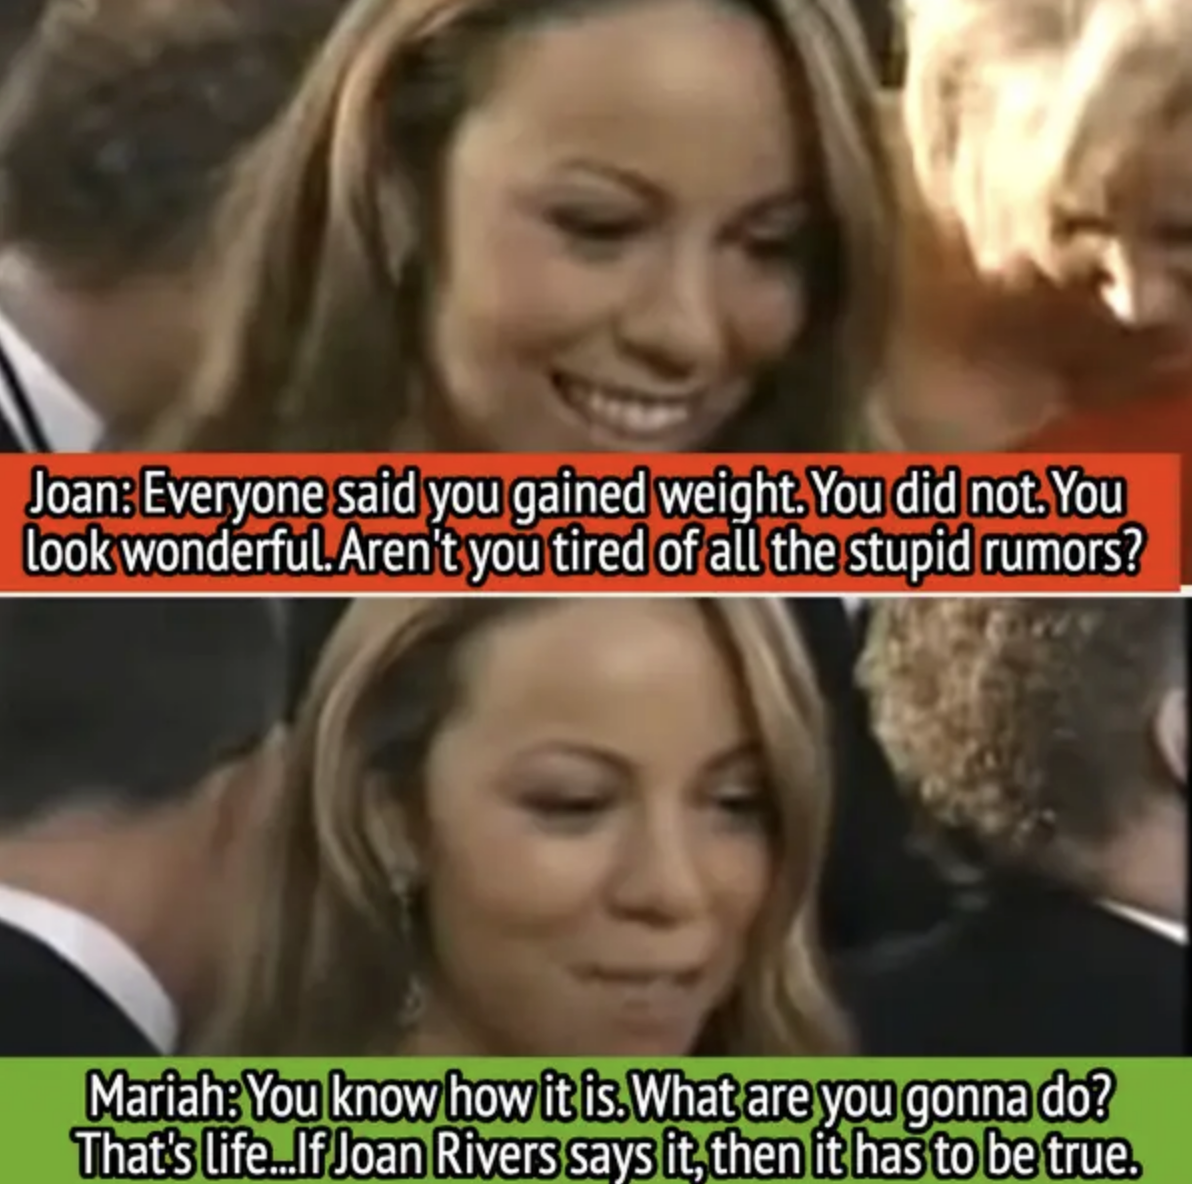 Joan brings up rumors Mariah gained weight, so Mariah says, &quot;If Joan Rivers says it, then it has to be true&quot;